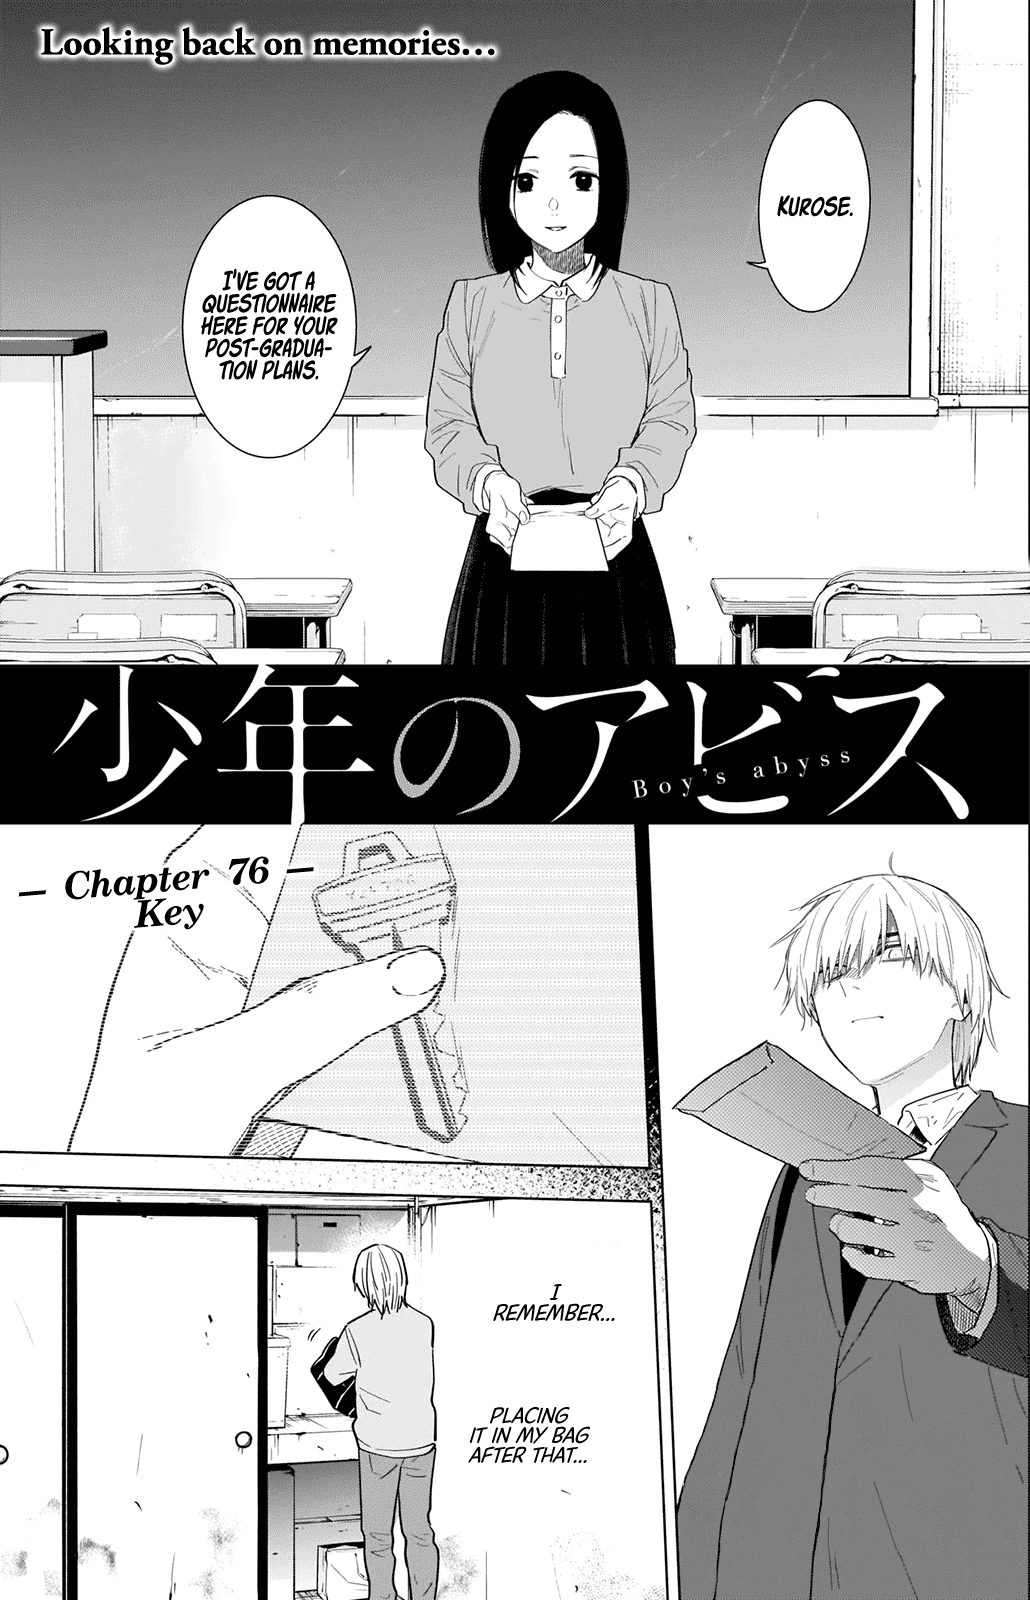 Boy's Abyss - Chapter 76 Page 2